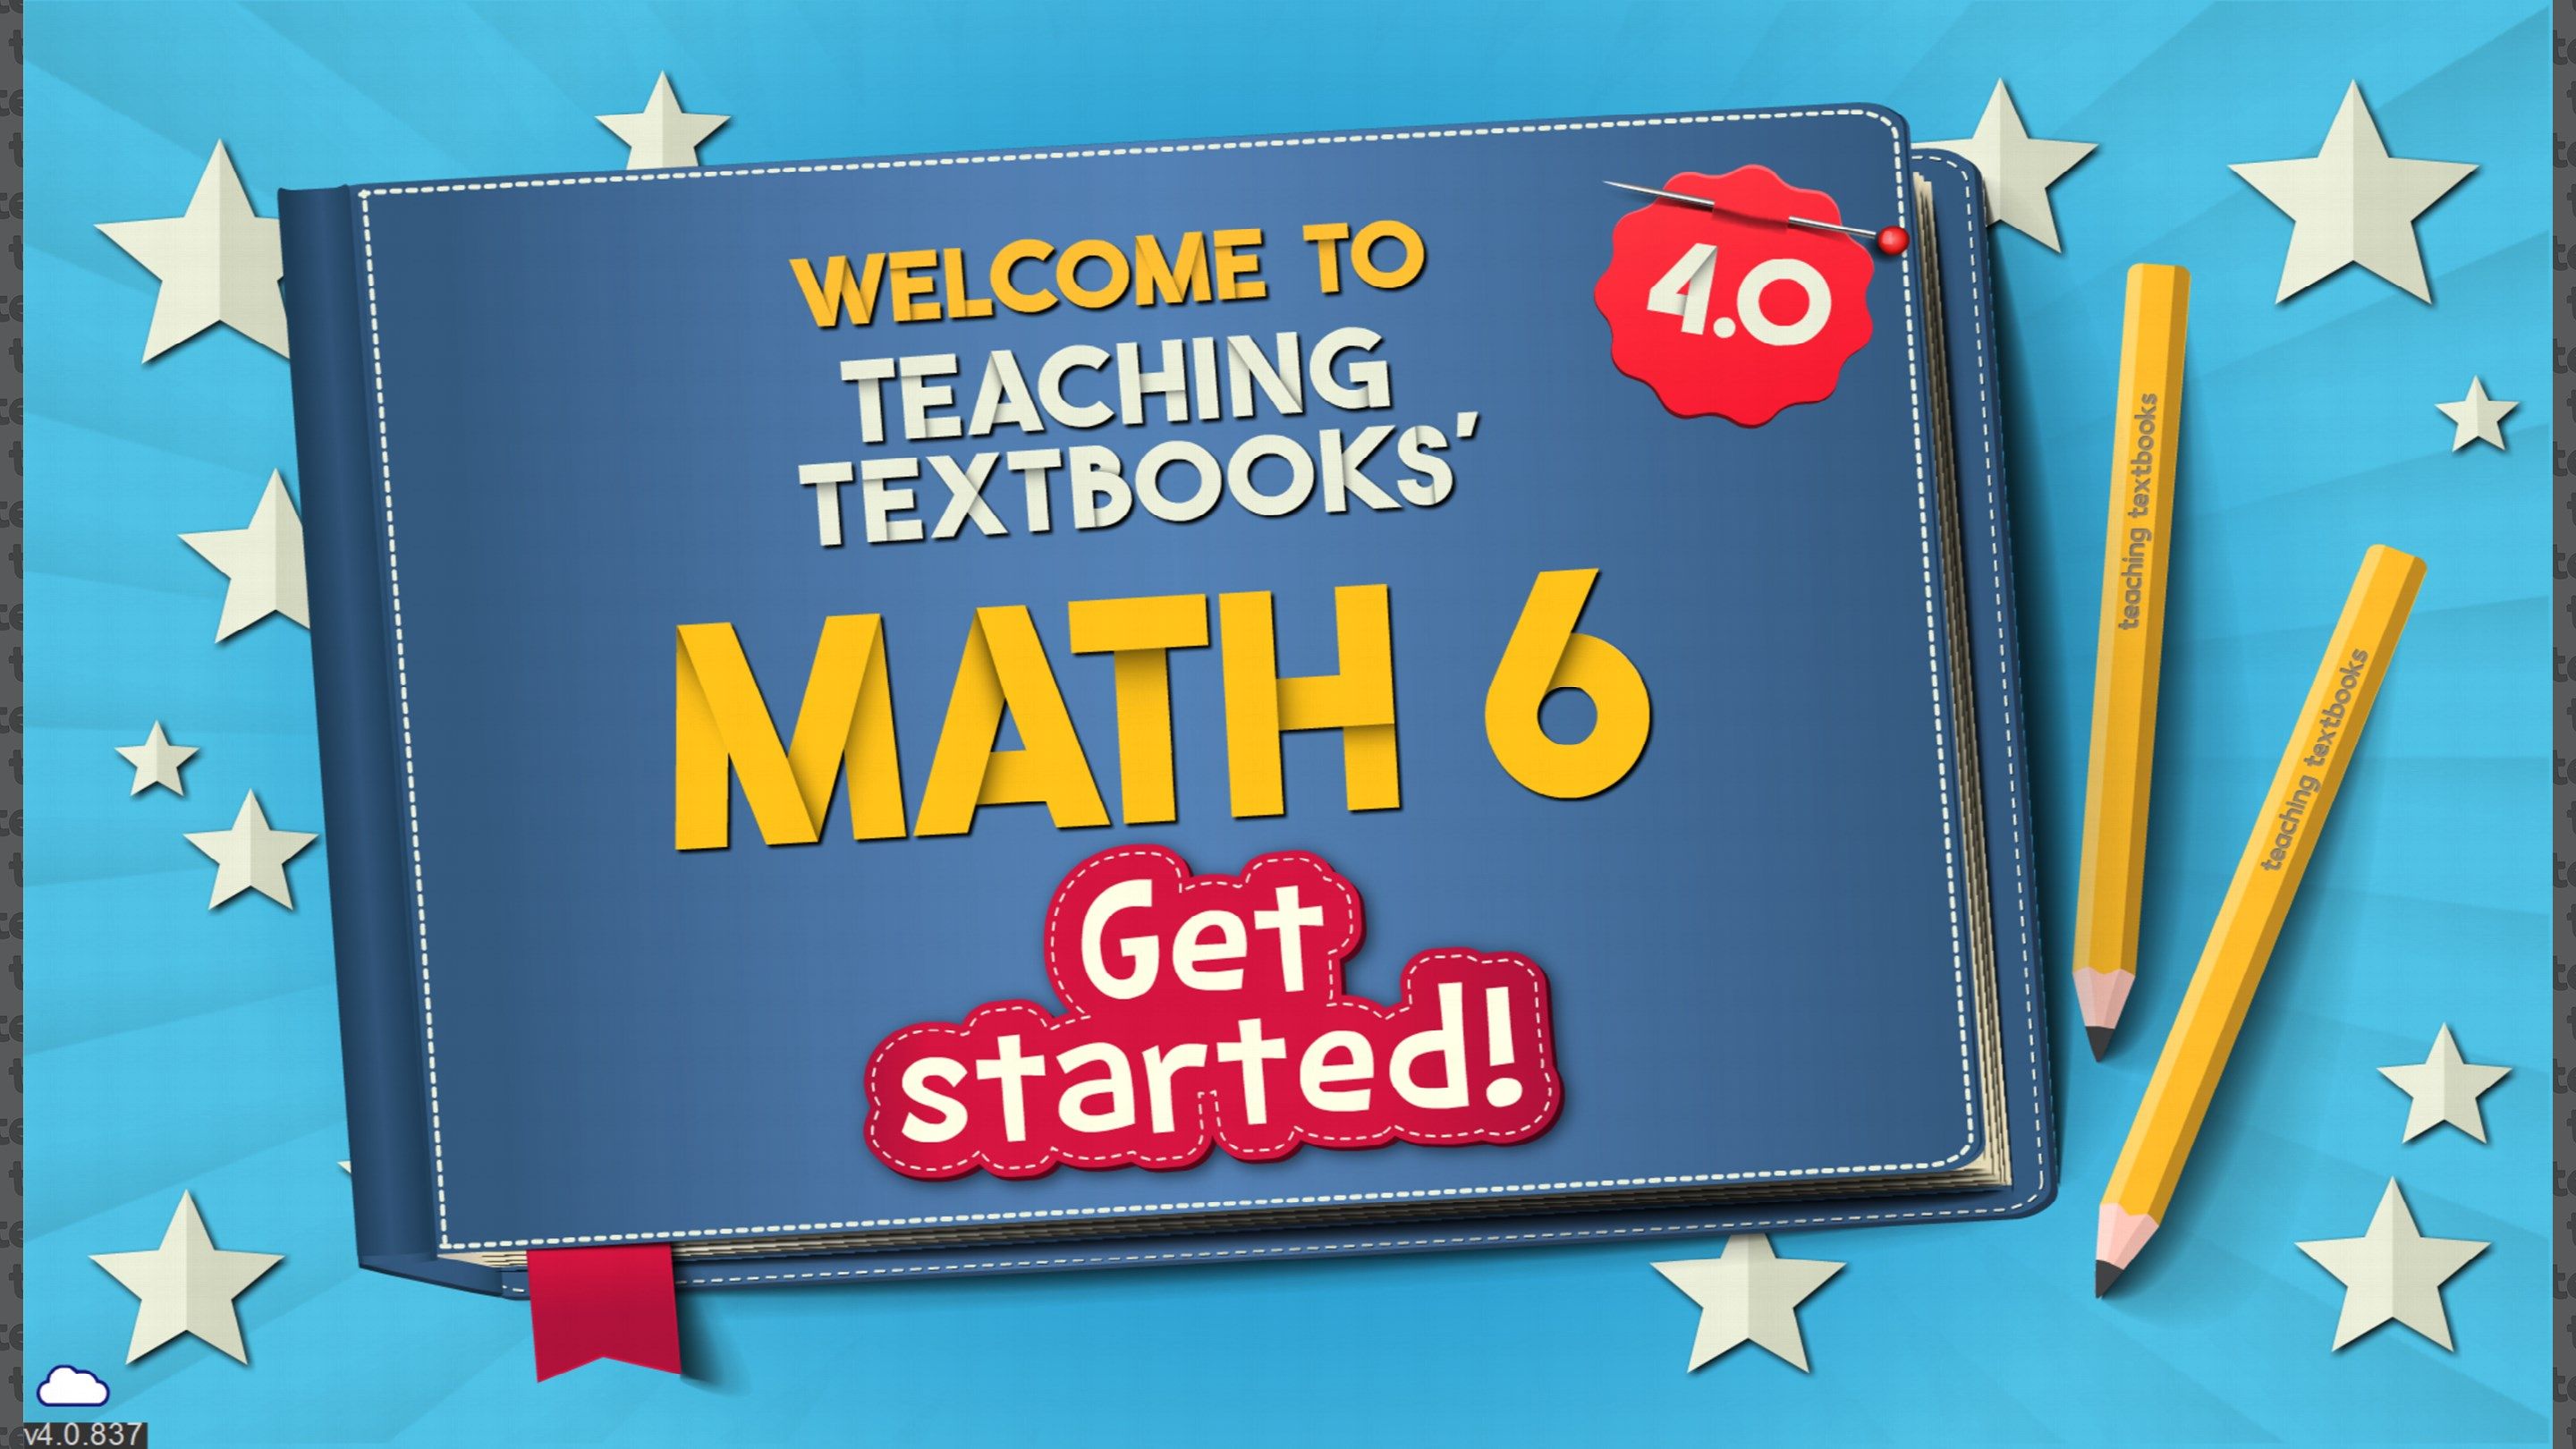 When the app launches, all you have to do to get started is log in with your Teaching Textbooks parent account, and it will connect to your Math 6 enrollment.